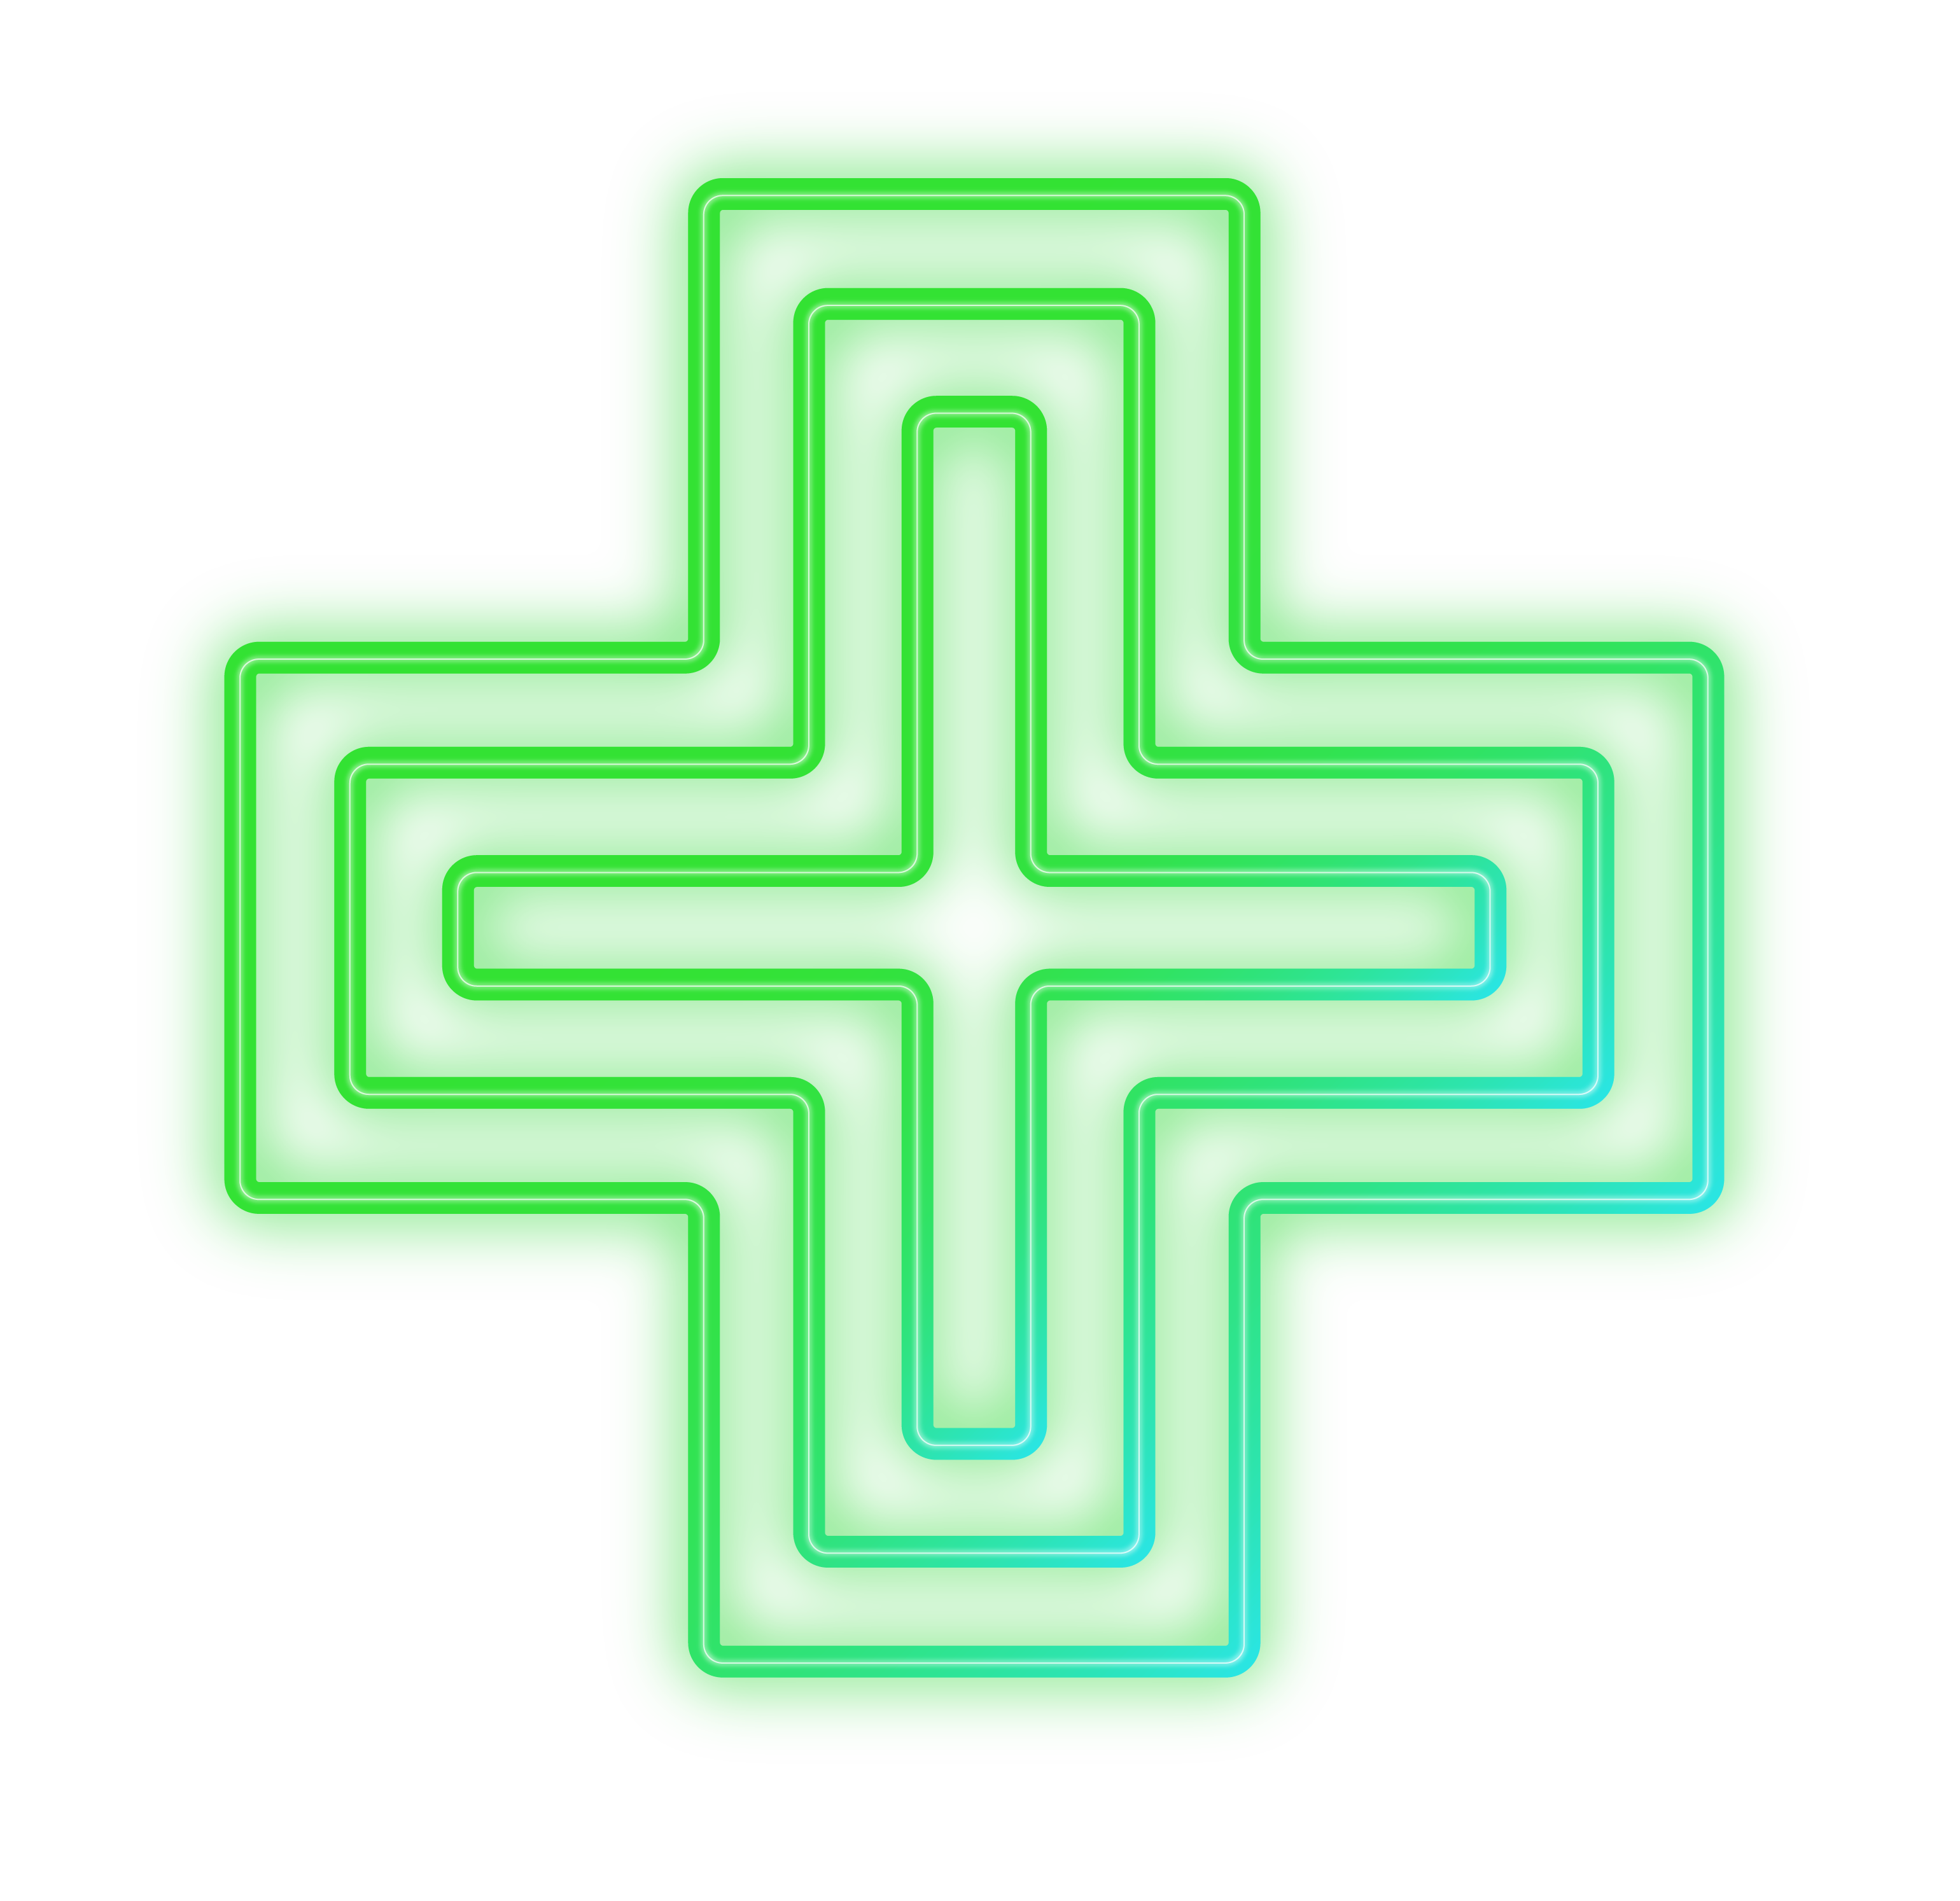 Pharmacy sign in the shape of a neon green cross